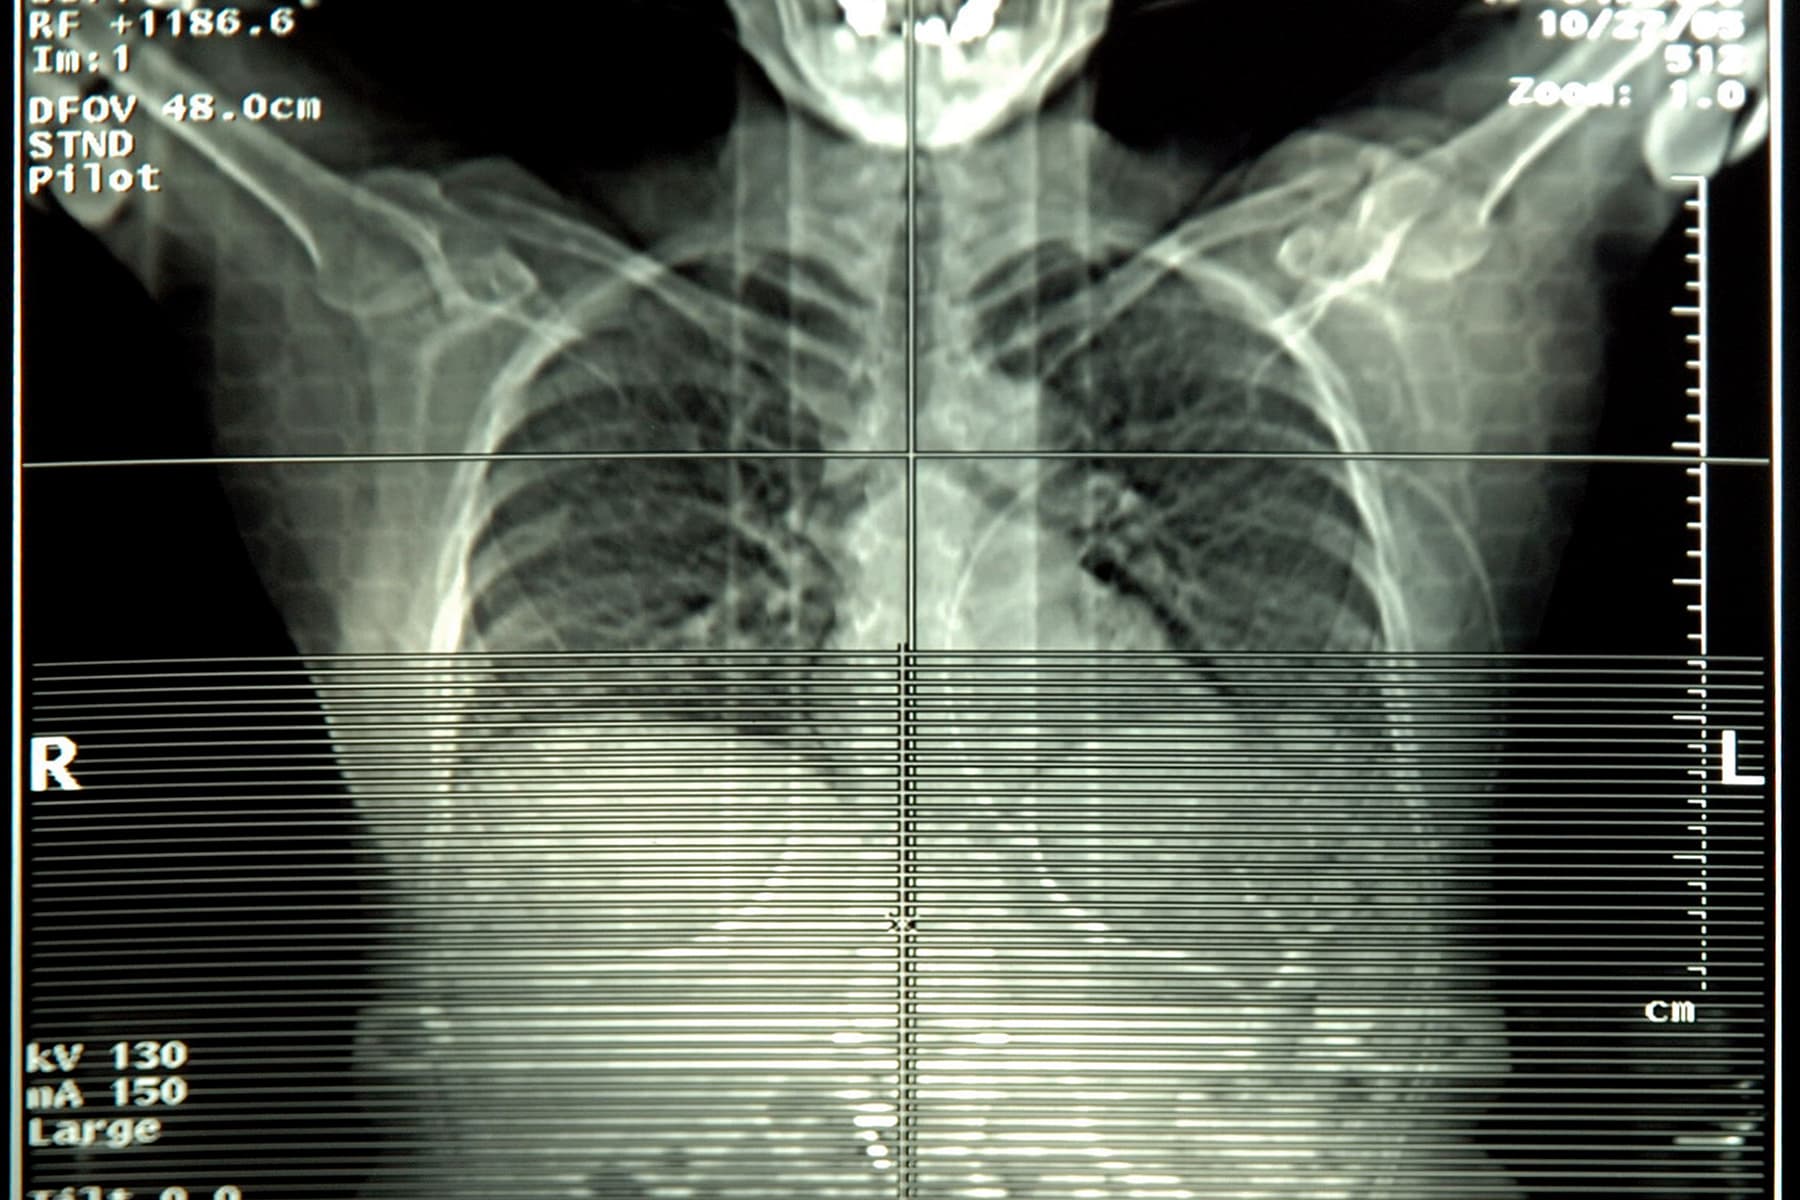 lung x-ray